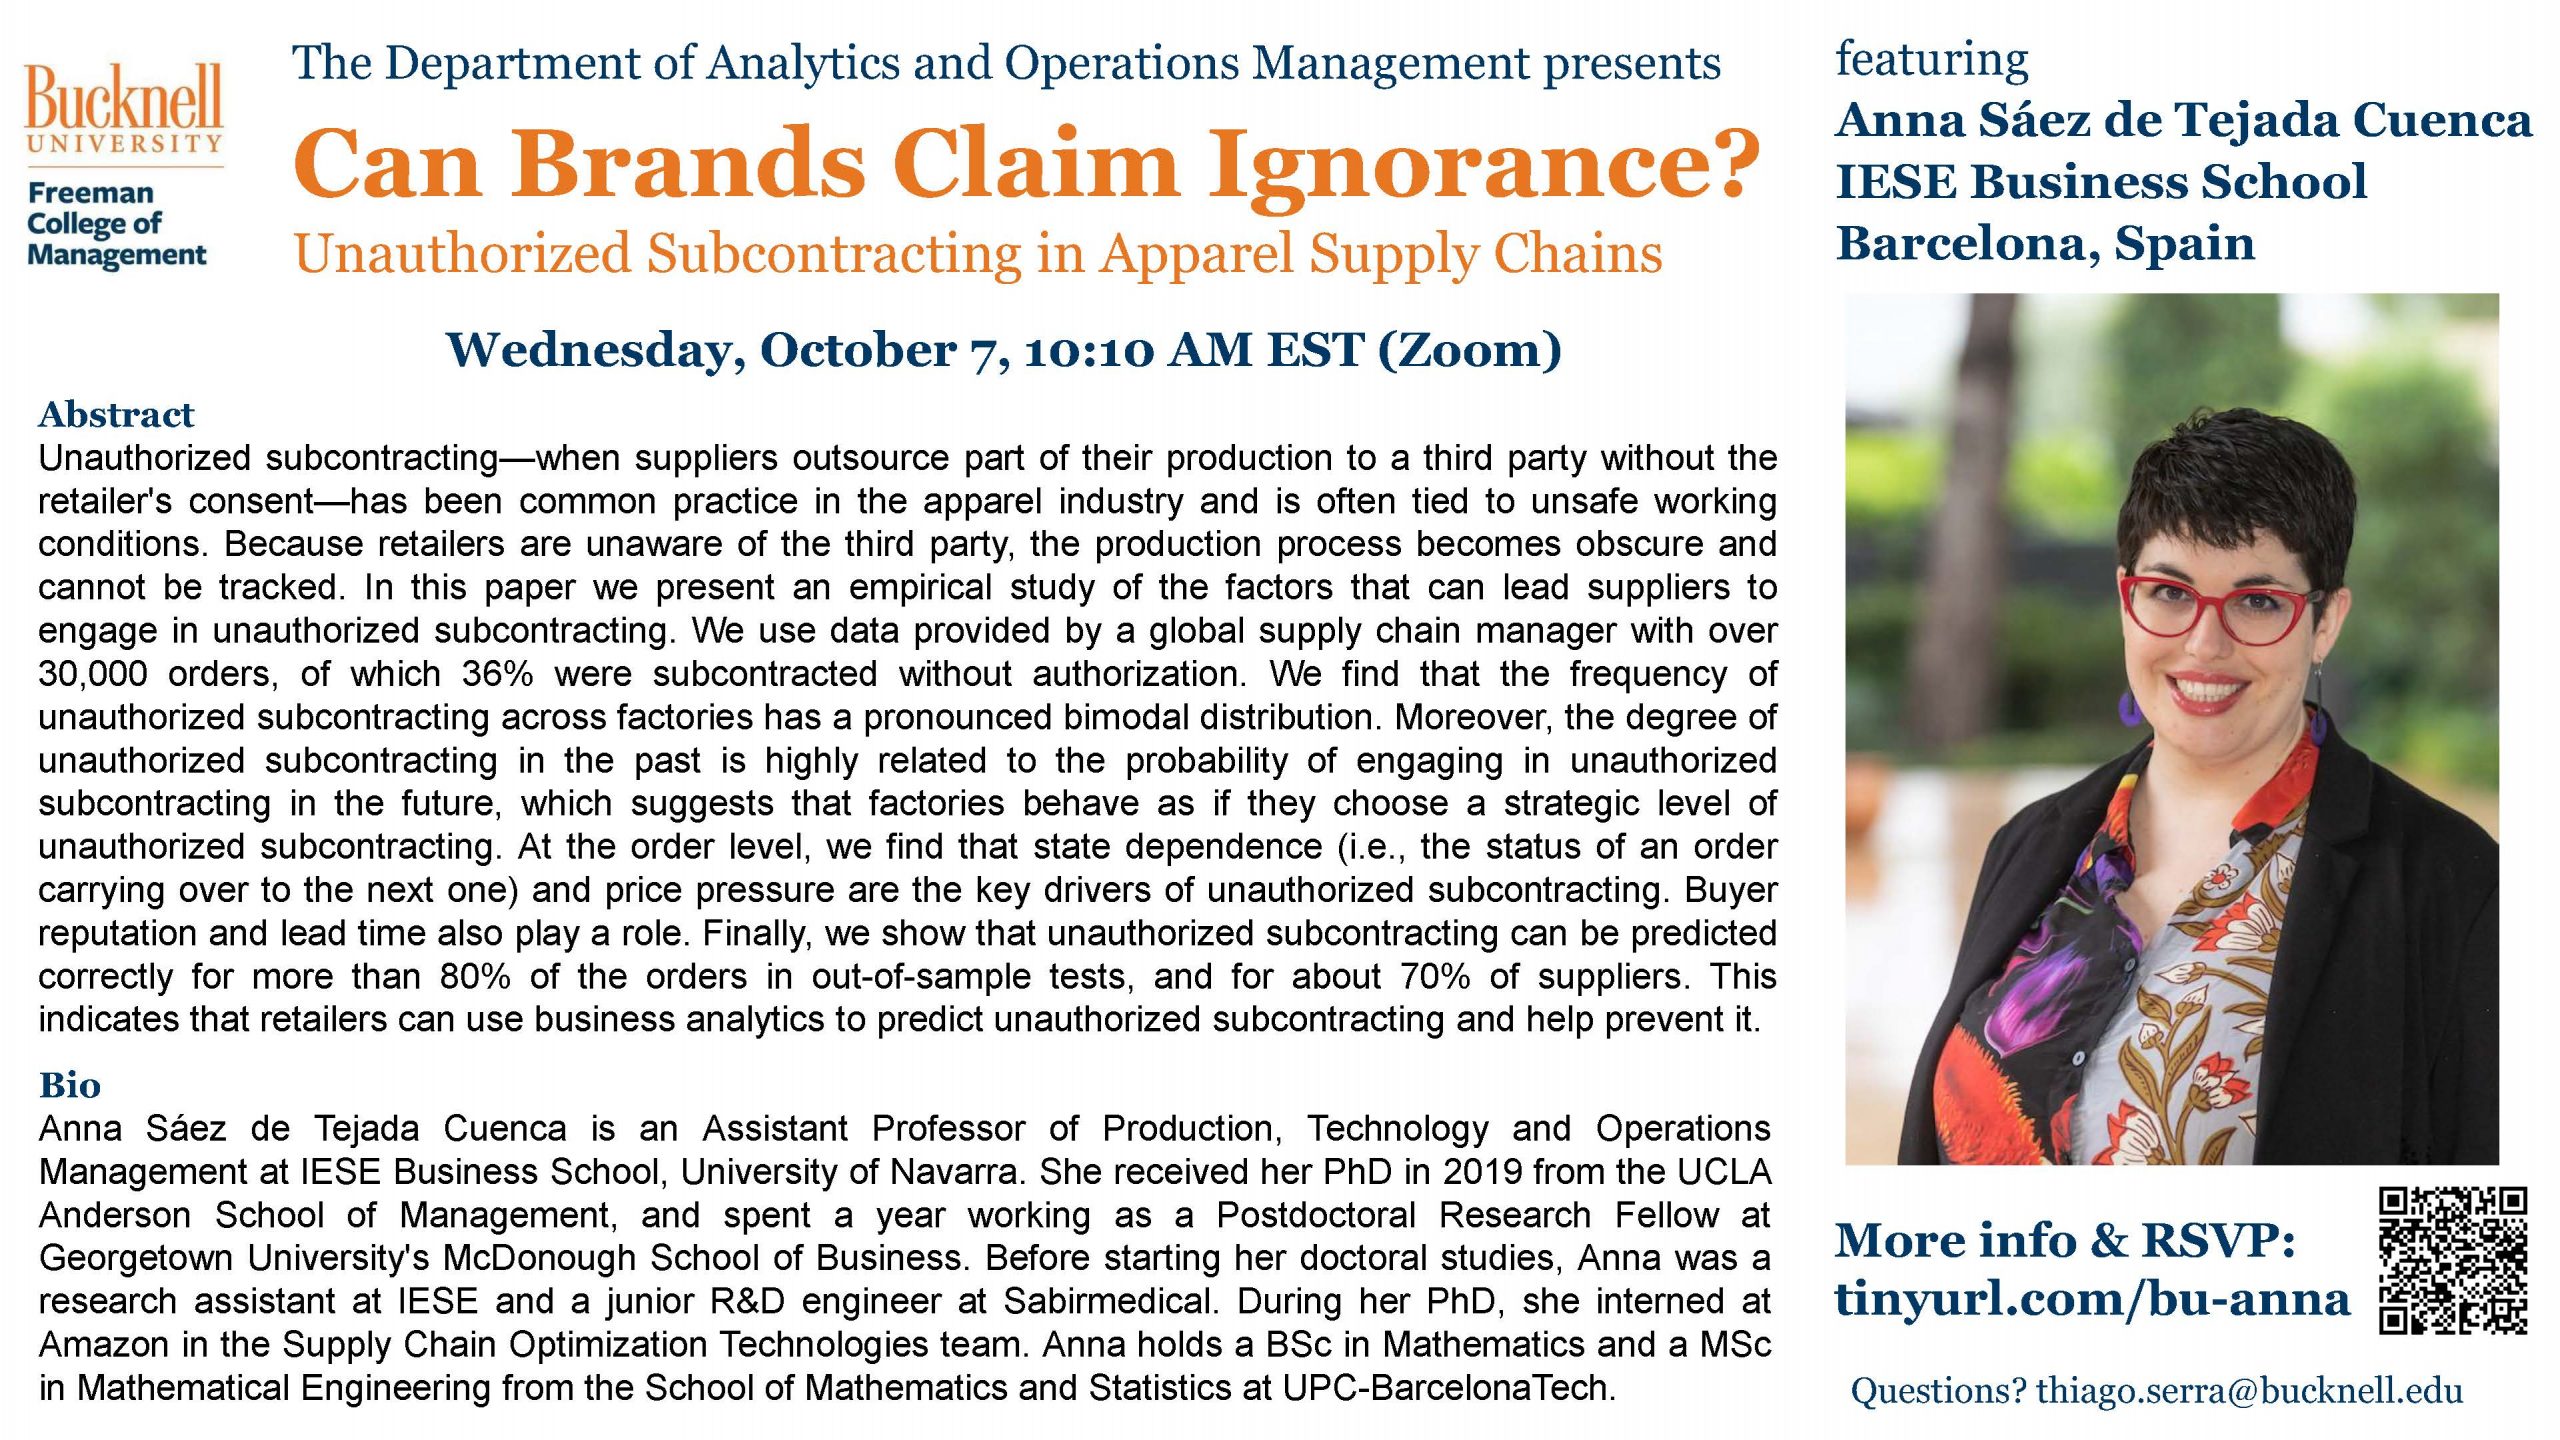 Can Brands Claim Ignorance? Wed Oct 7, 10:10 AM